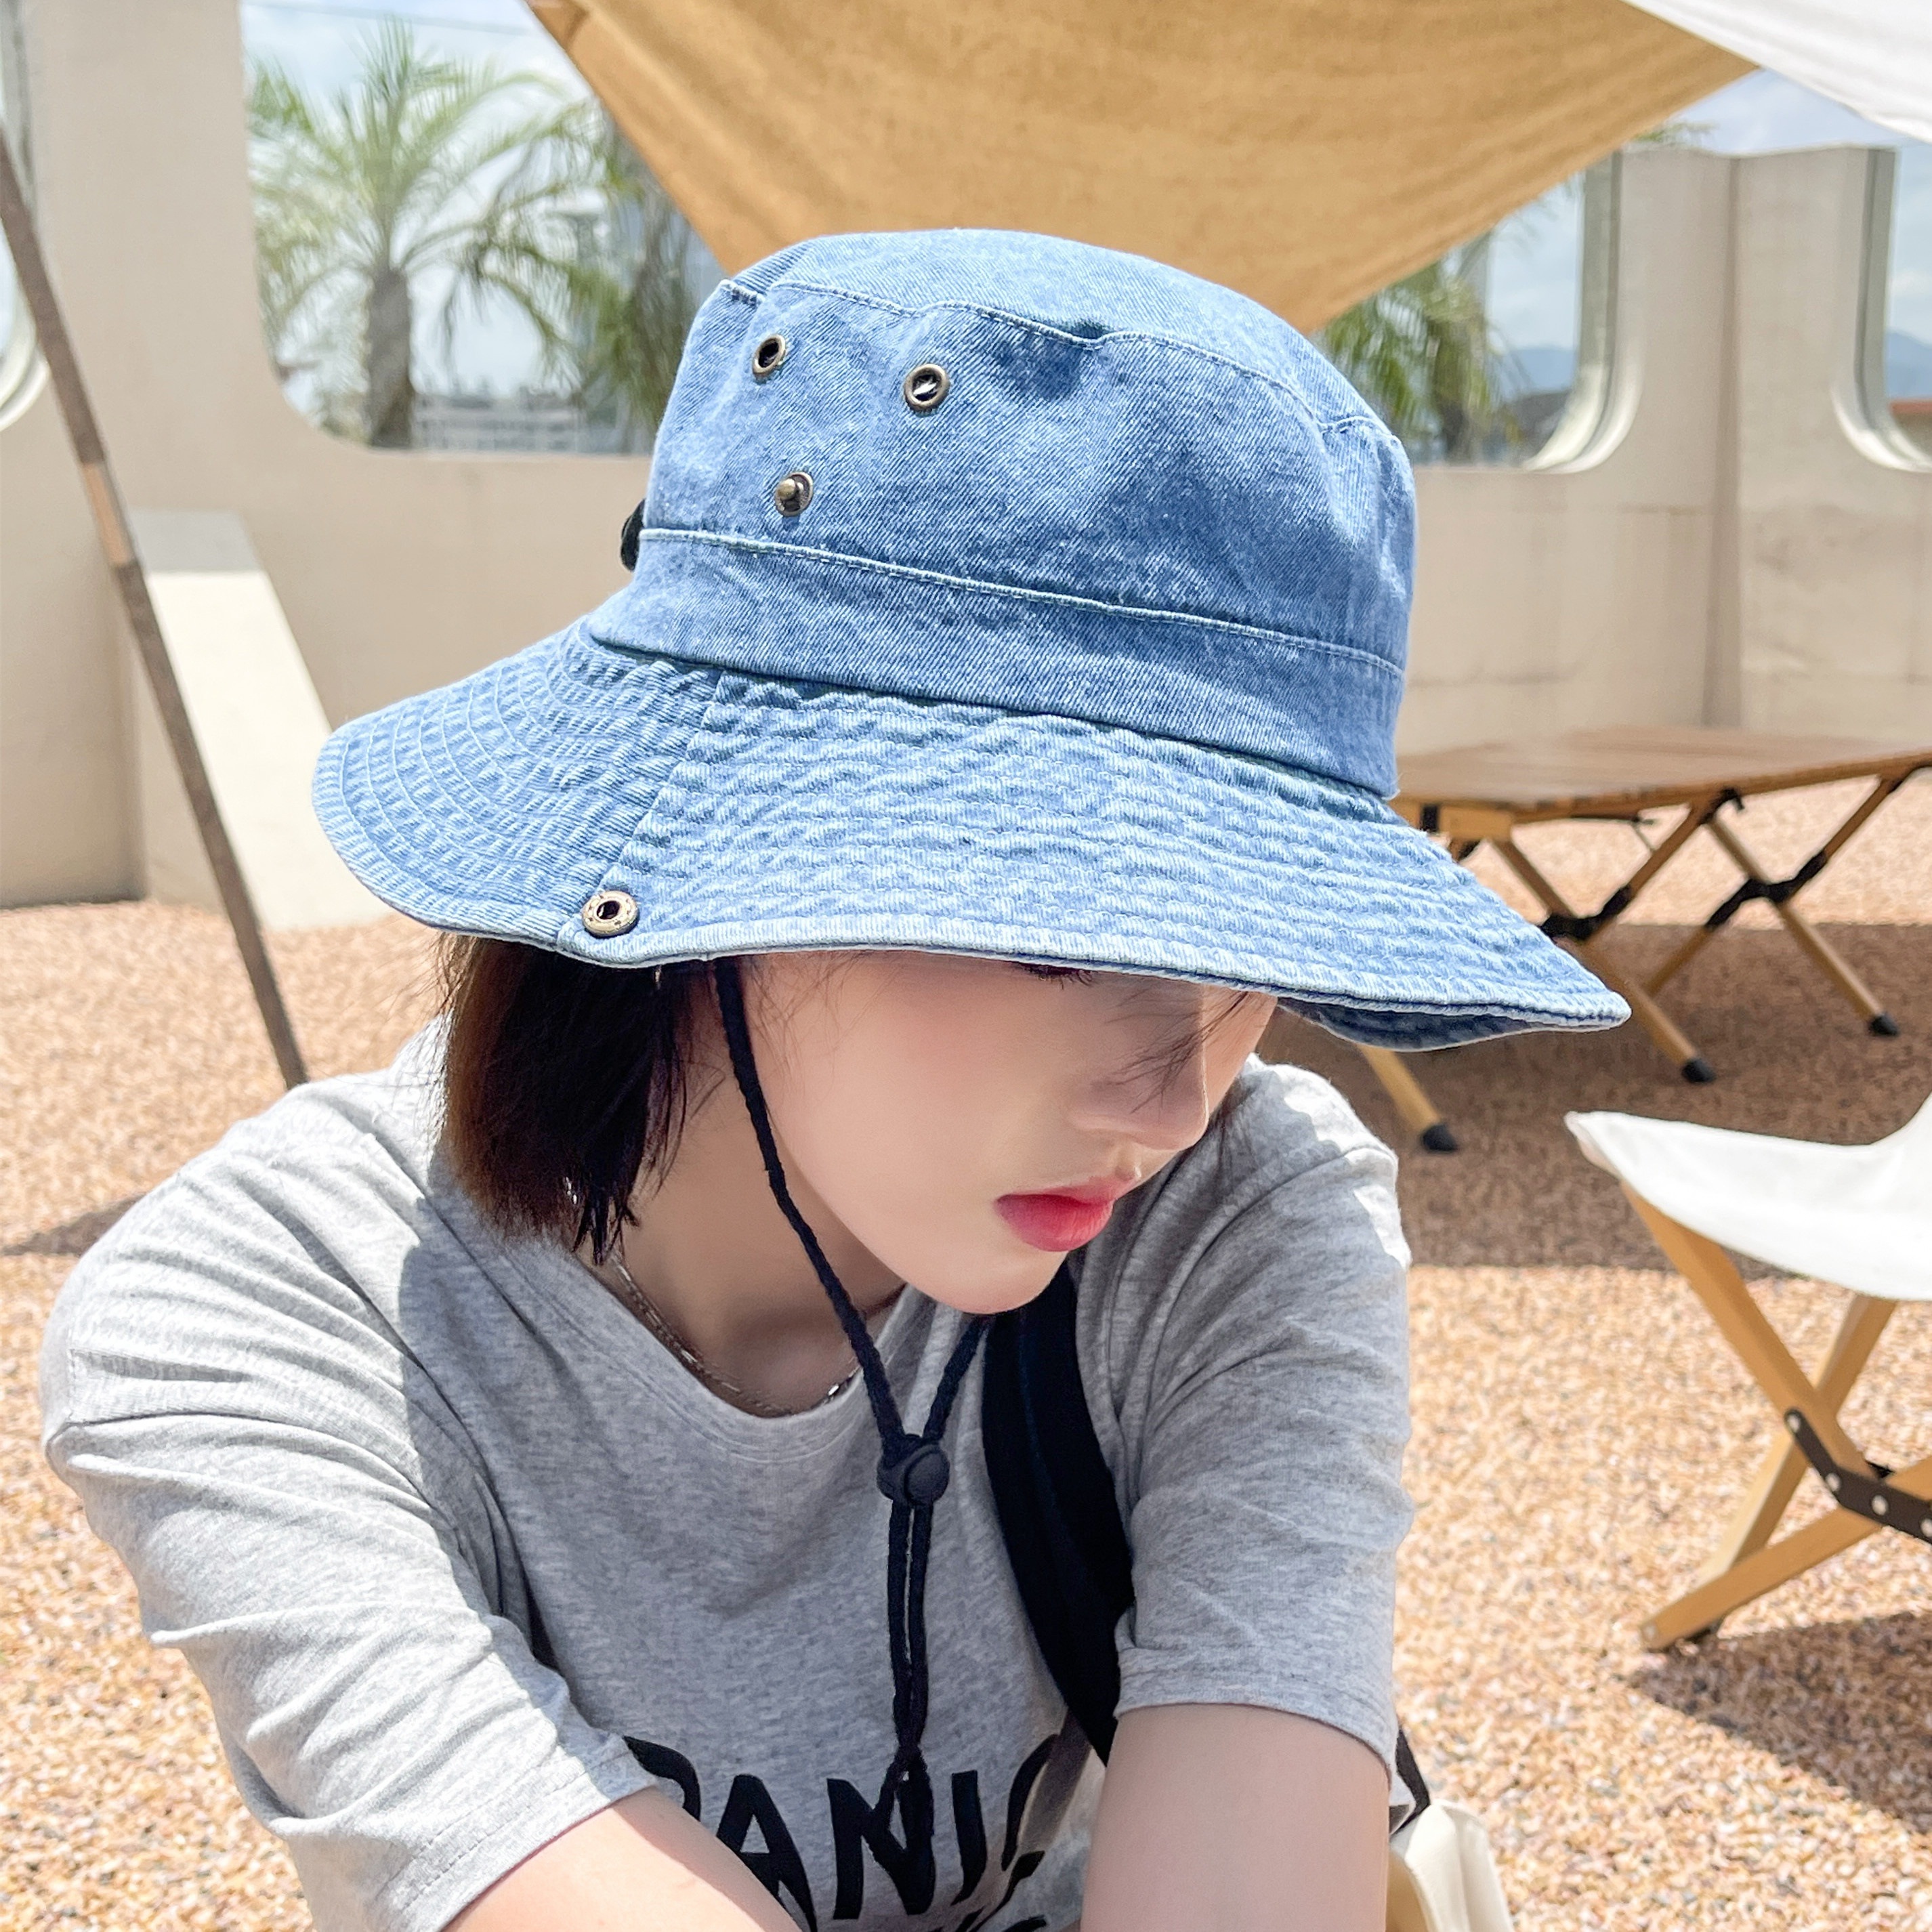 Vintage Denim Bucket Hat Solid Color Washed Distressed Sun Hats Foldable  Boonie Hats For Women Girls